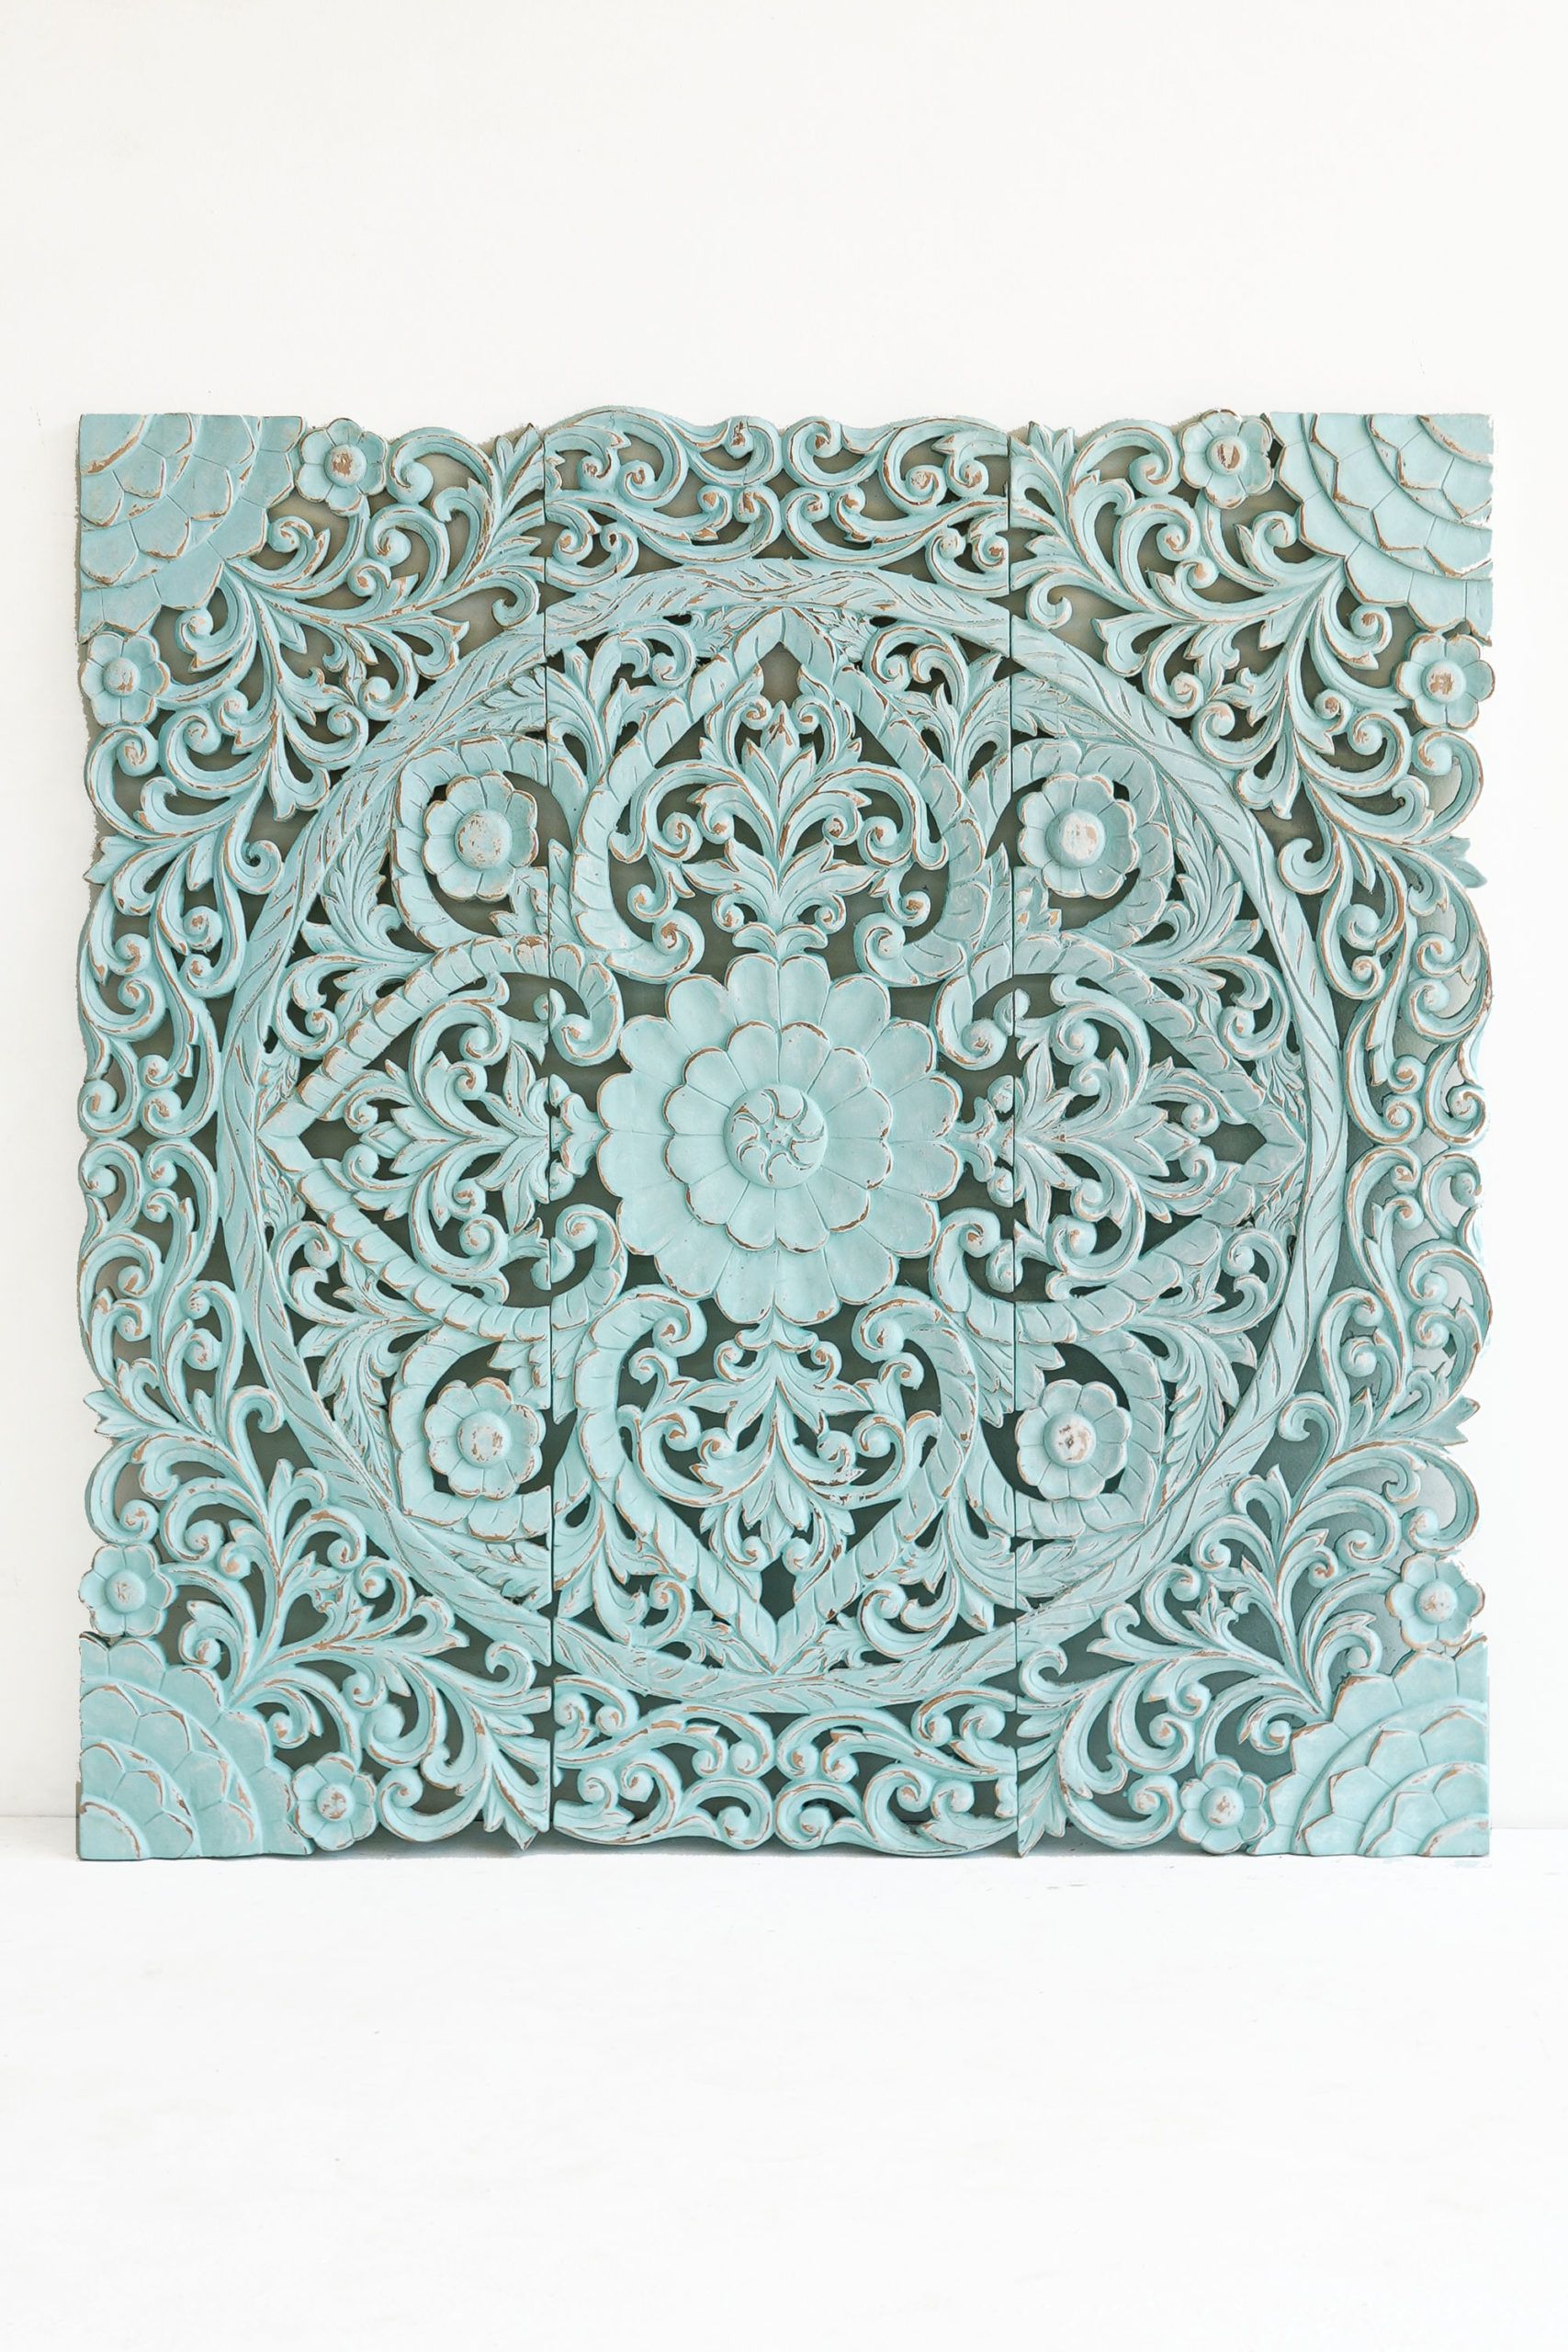 Hand Carved Wall Panel From Bali – Siam Sawadee Intended For Latest Blue Wood Wall Art (Gallery 19 of 20)